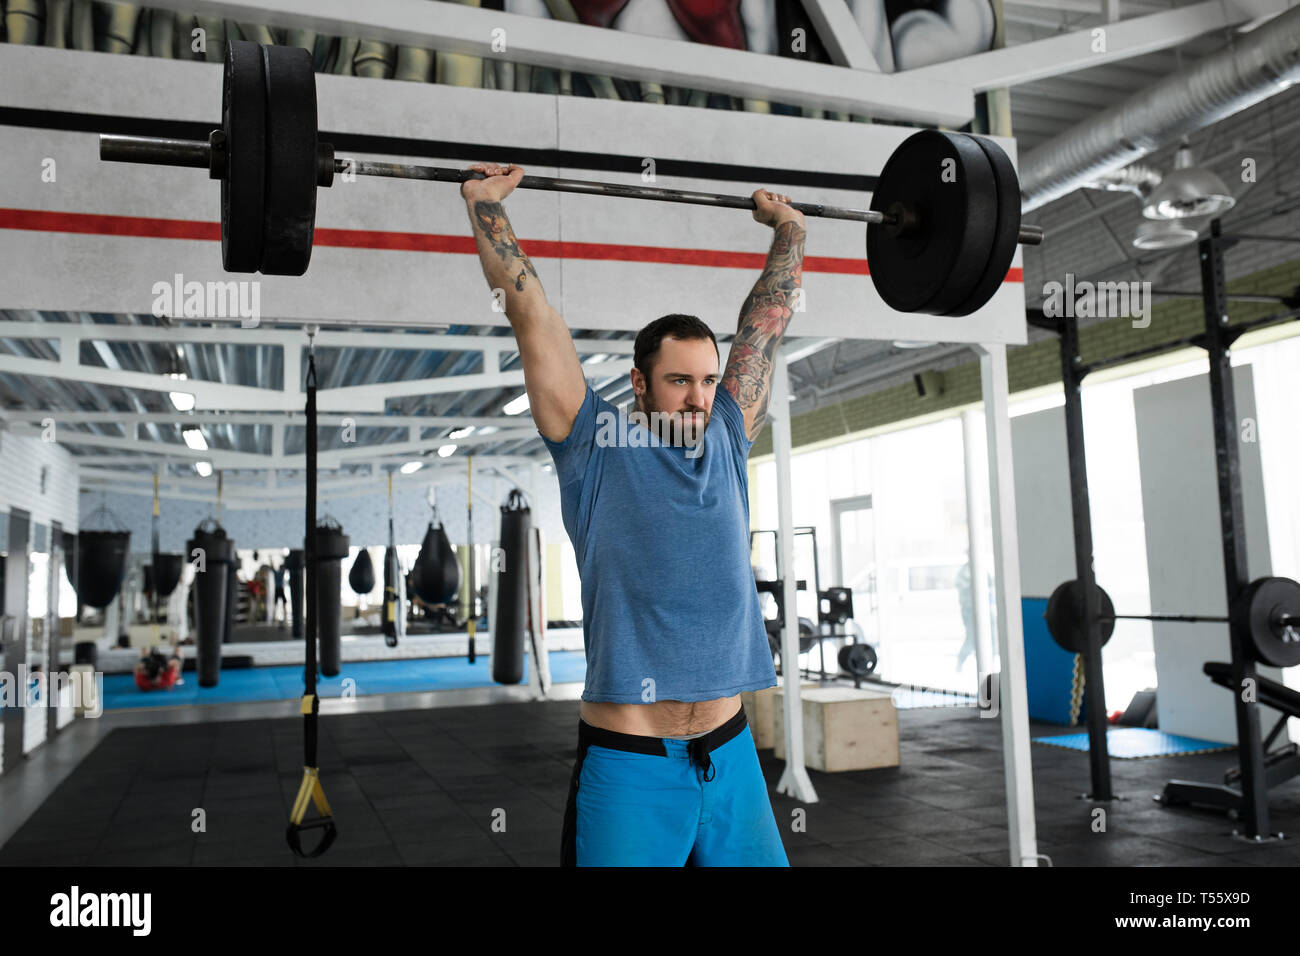 Mid adult man weight lifting in gym Stock Photo